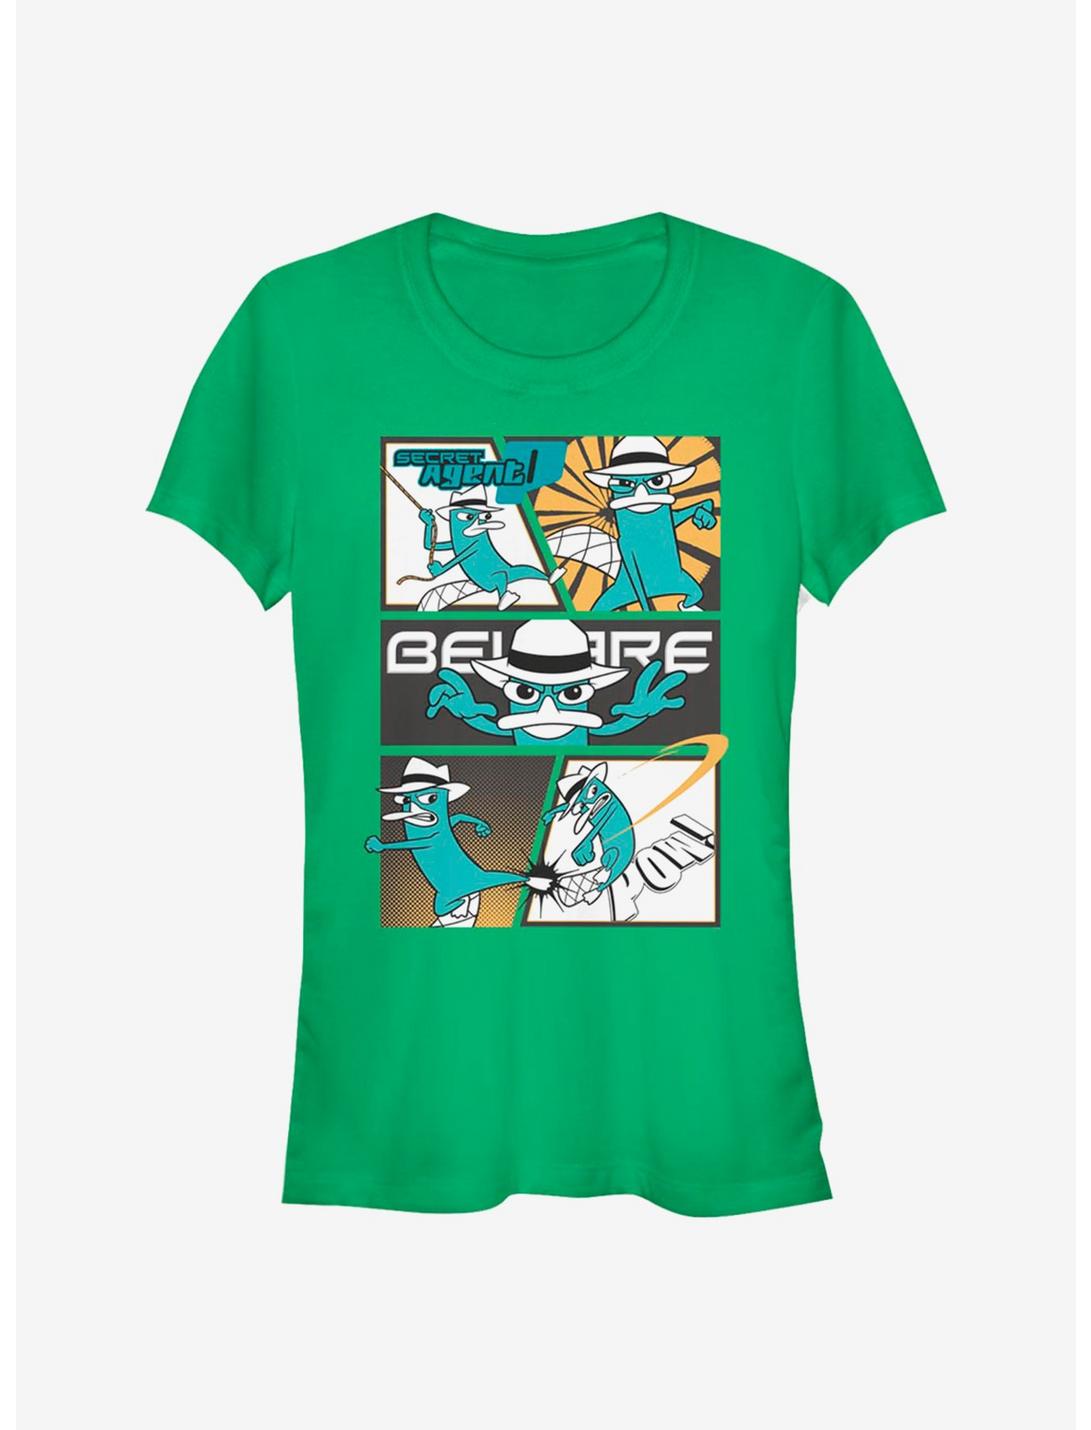 Disney Phineas And Ferb Agent P Box Up Girls T-Shirt, KELLY, hi-res